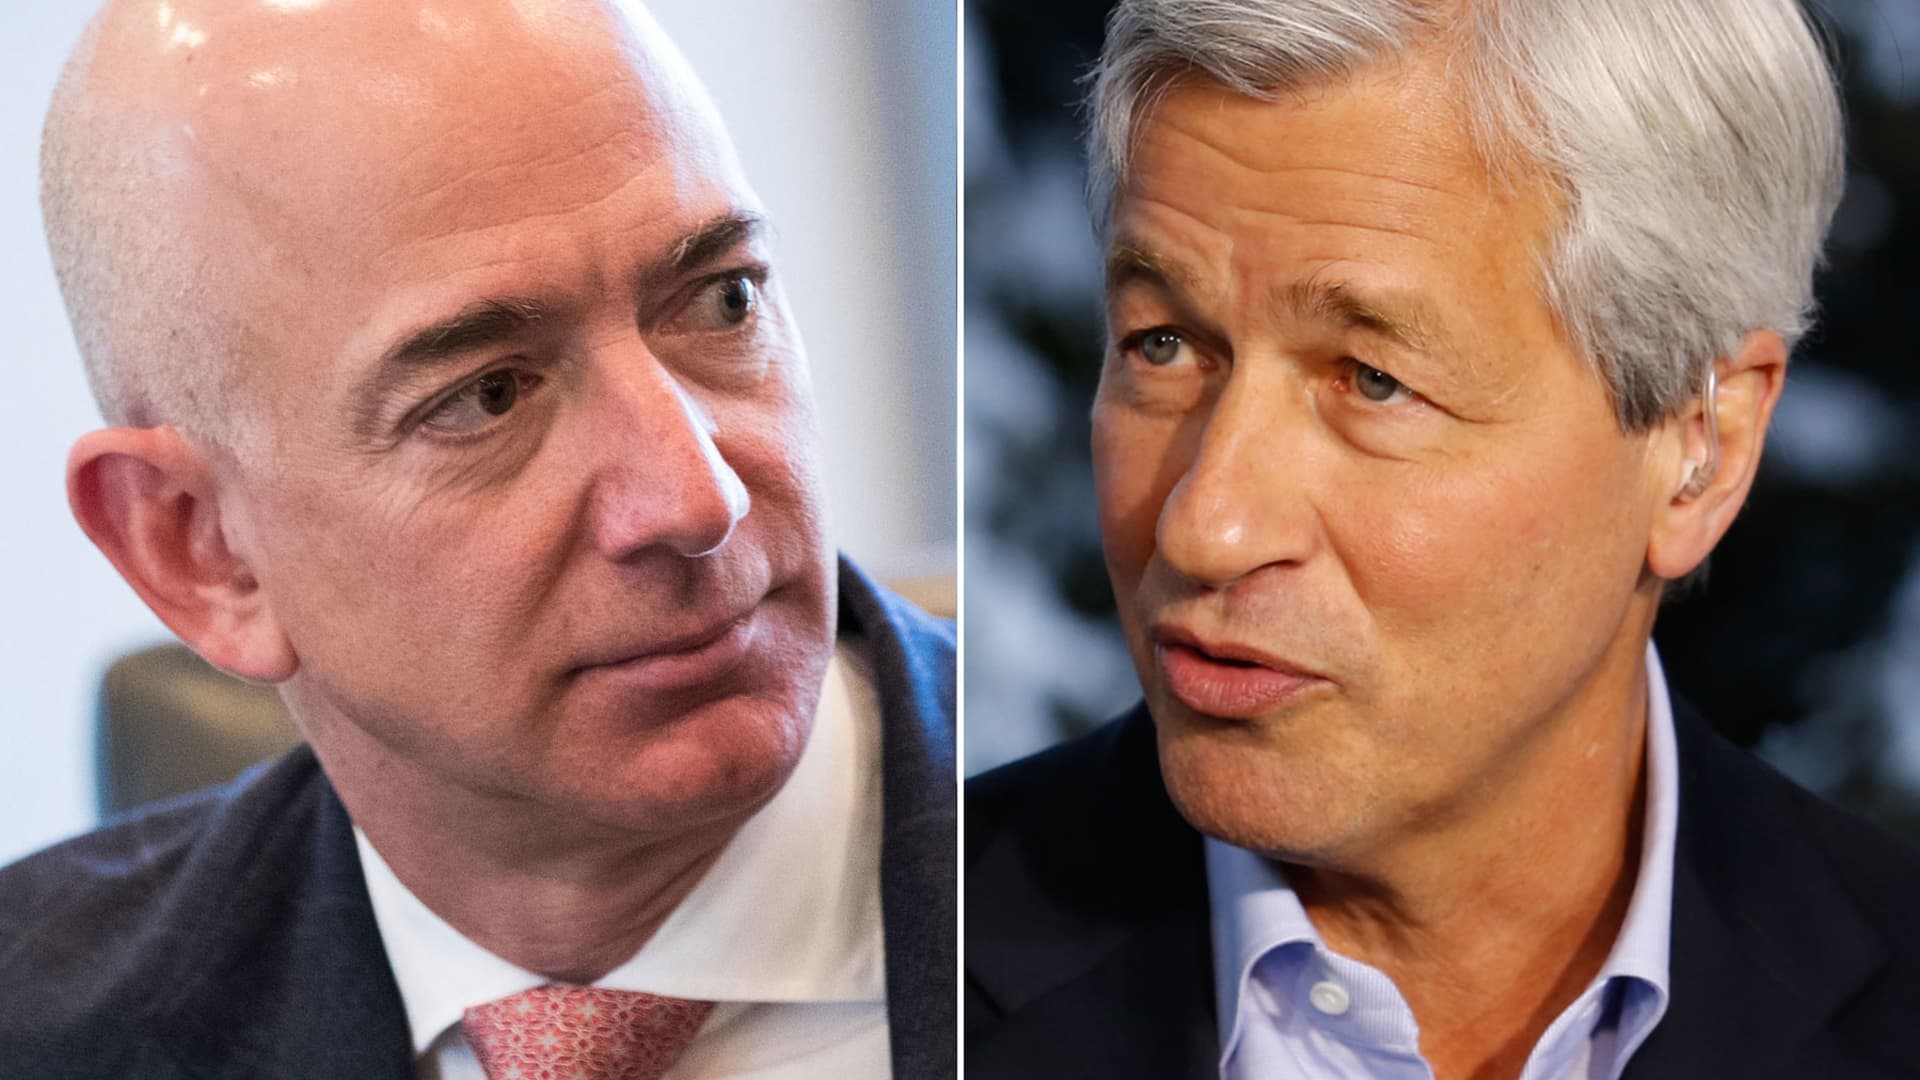 Amazon renews Prime credit card tie-up with JPMorgan Chase after flirting with American Express